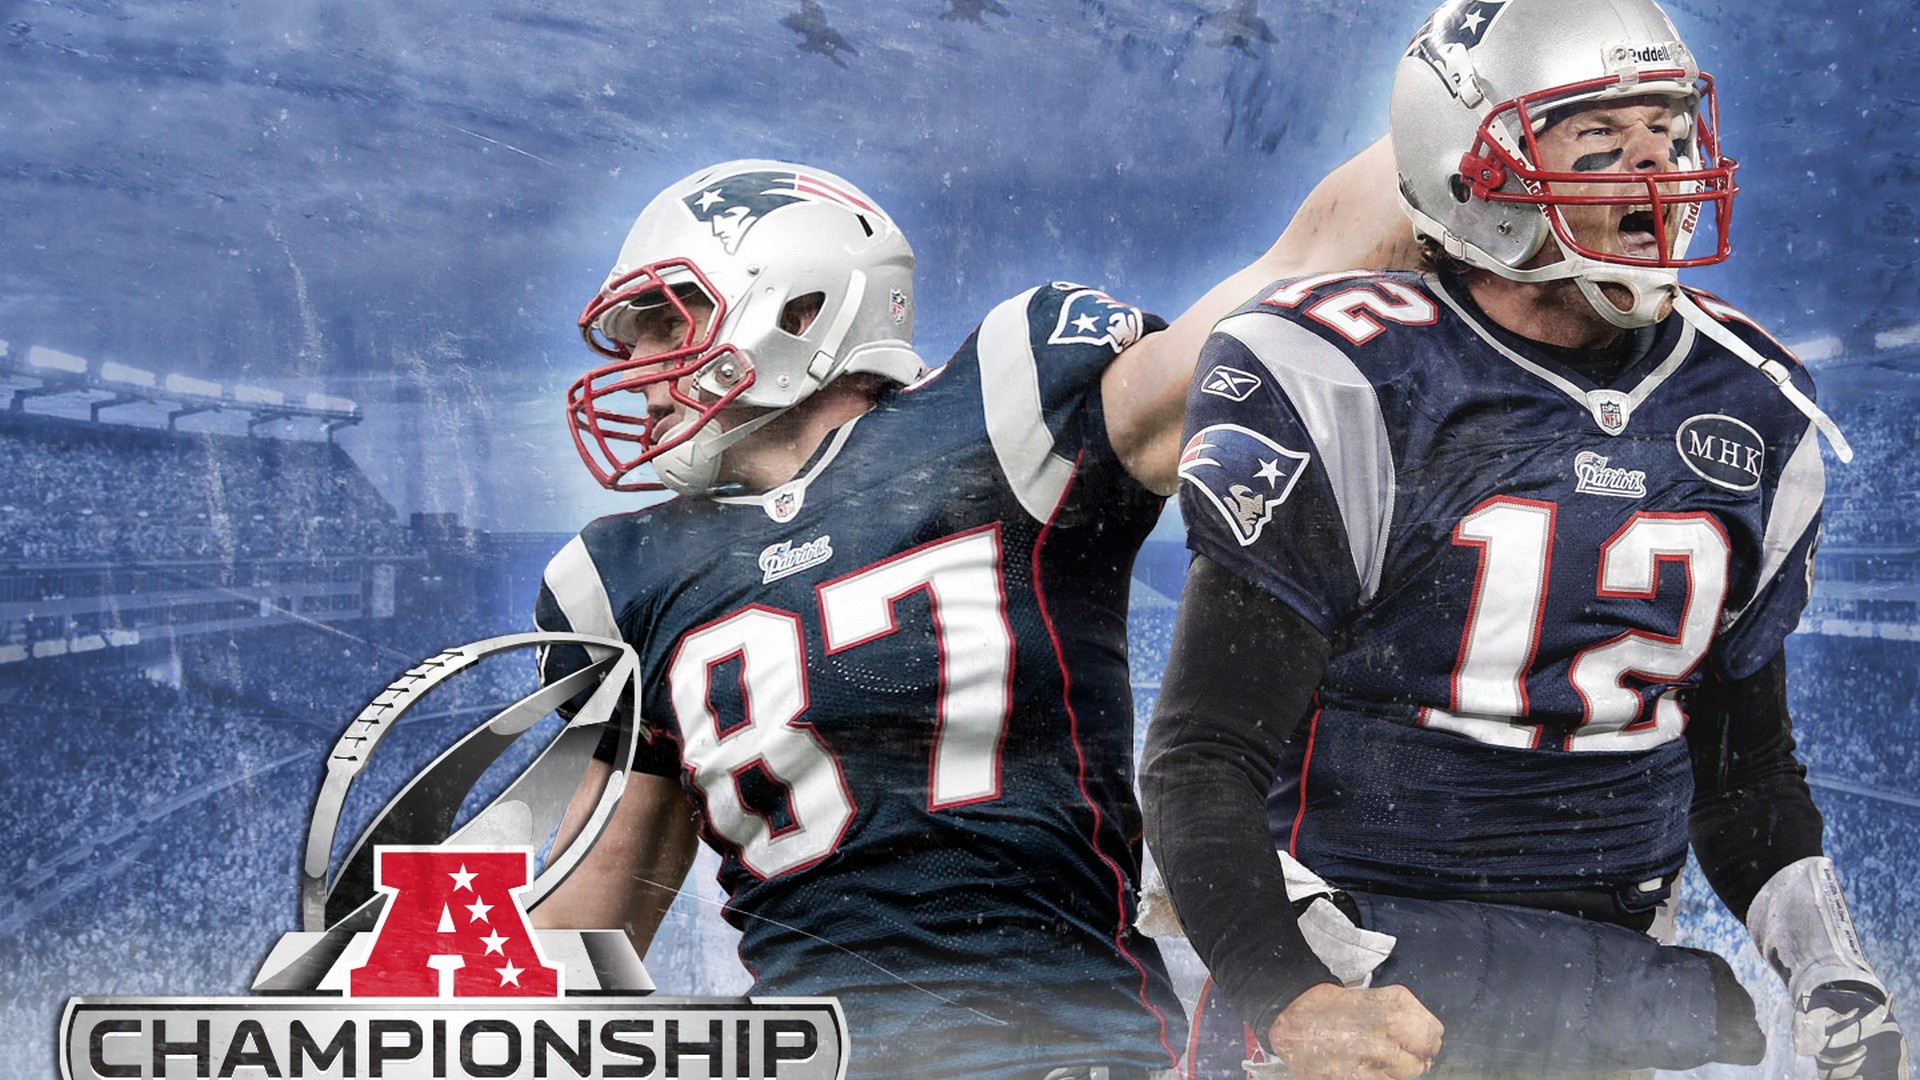 Patriots Mac Backgrounds With Resolution 1920X1080 pixel. You can make this wallpaper for your Mac or Windows Desktop Background, iPhone, Android or Tablet and another Smartphone device for free